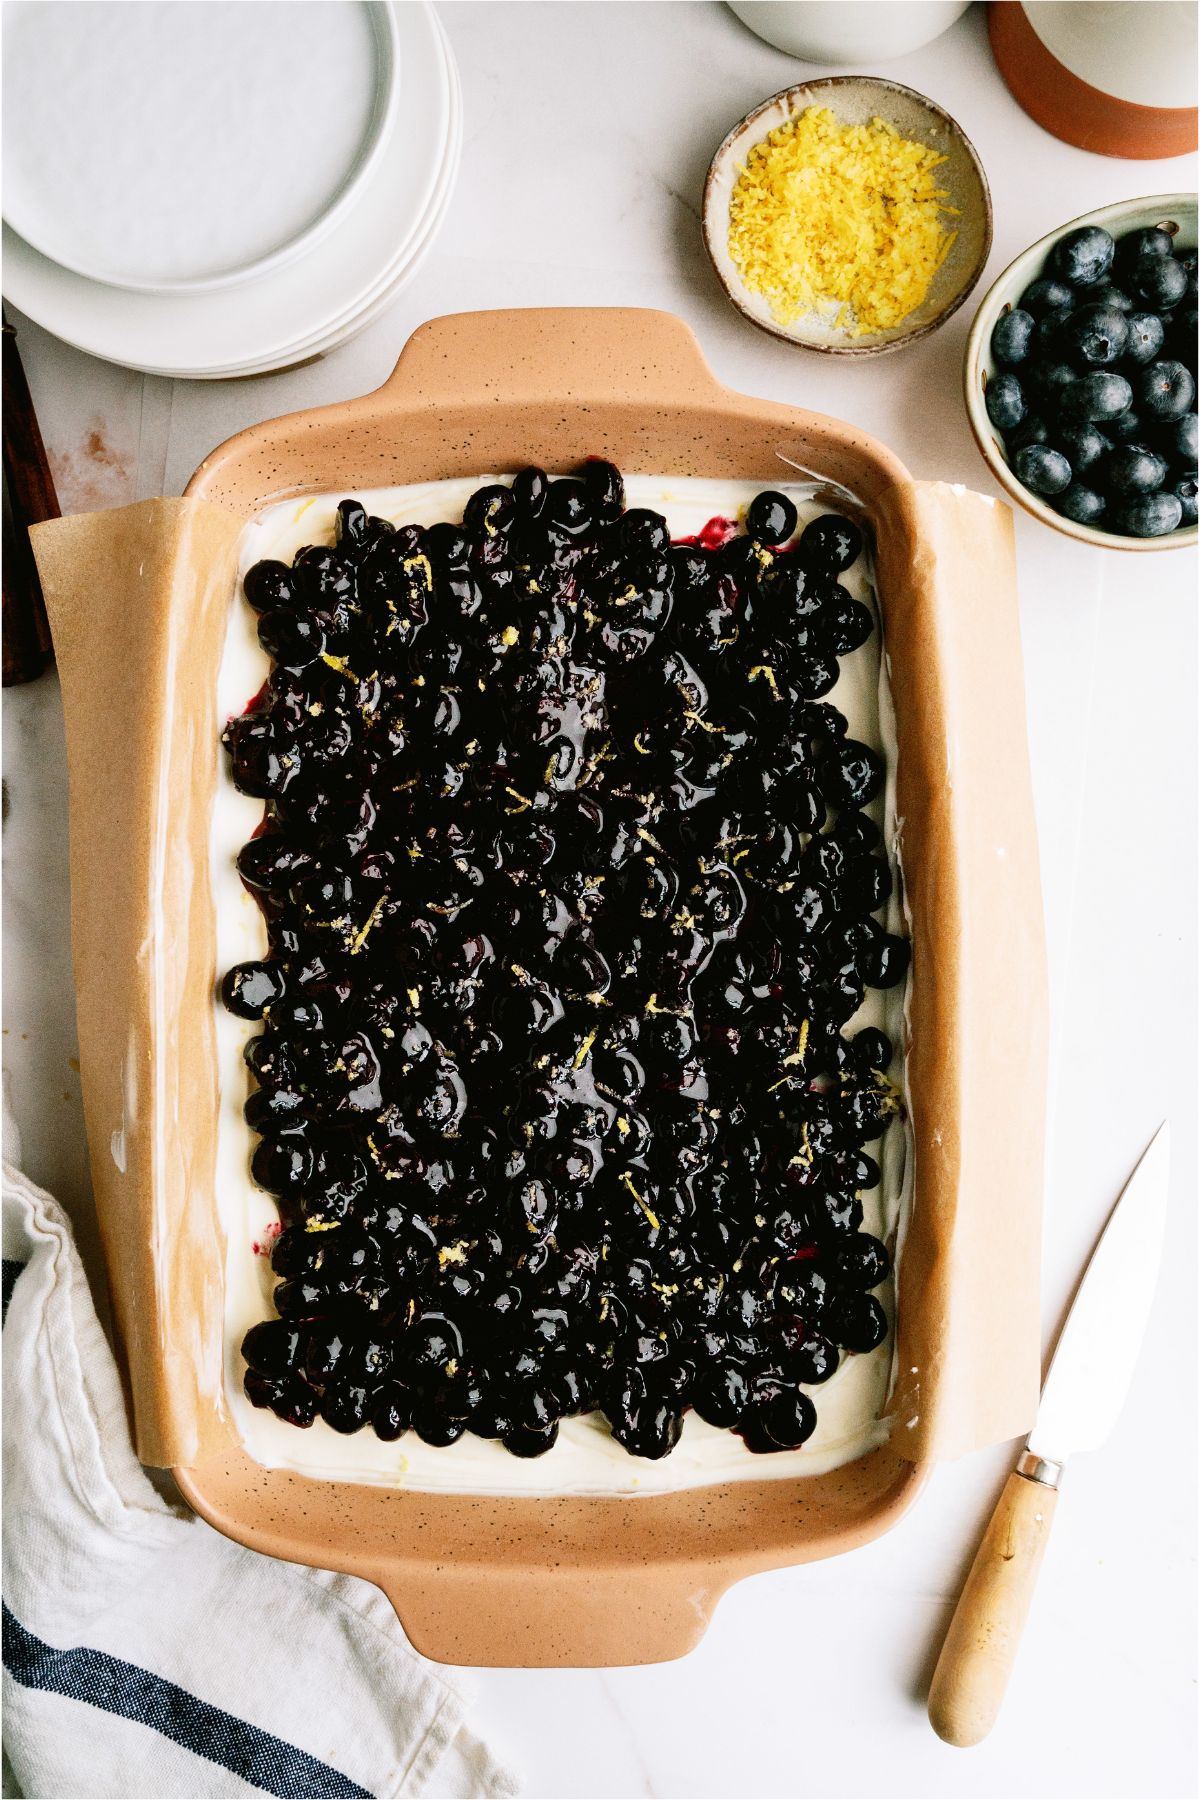 Blueberry Jamboree in a baking dish with lemon zest and blueberries on the side